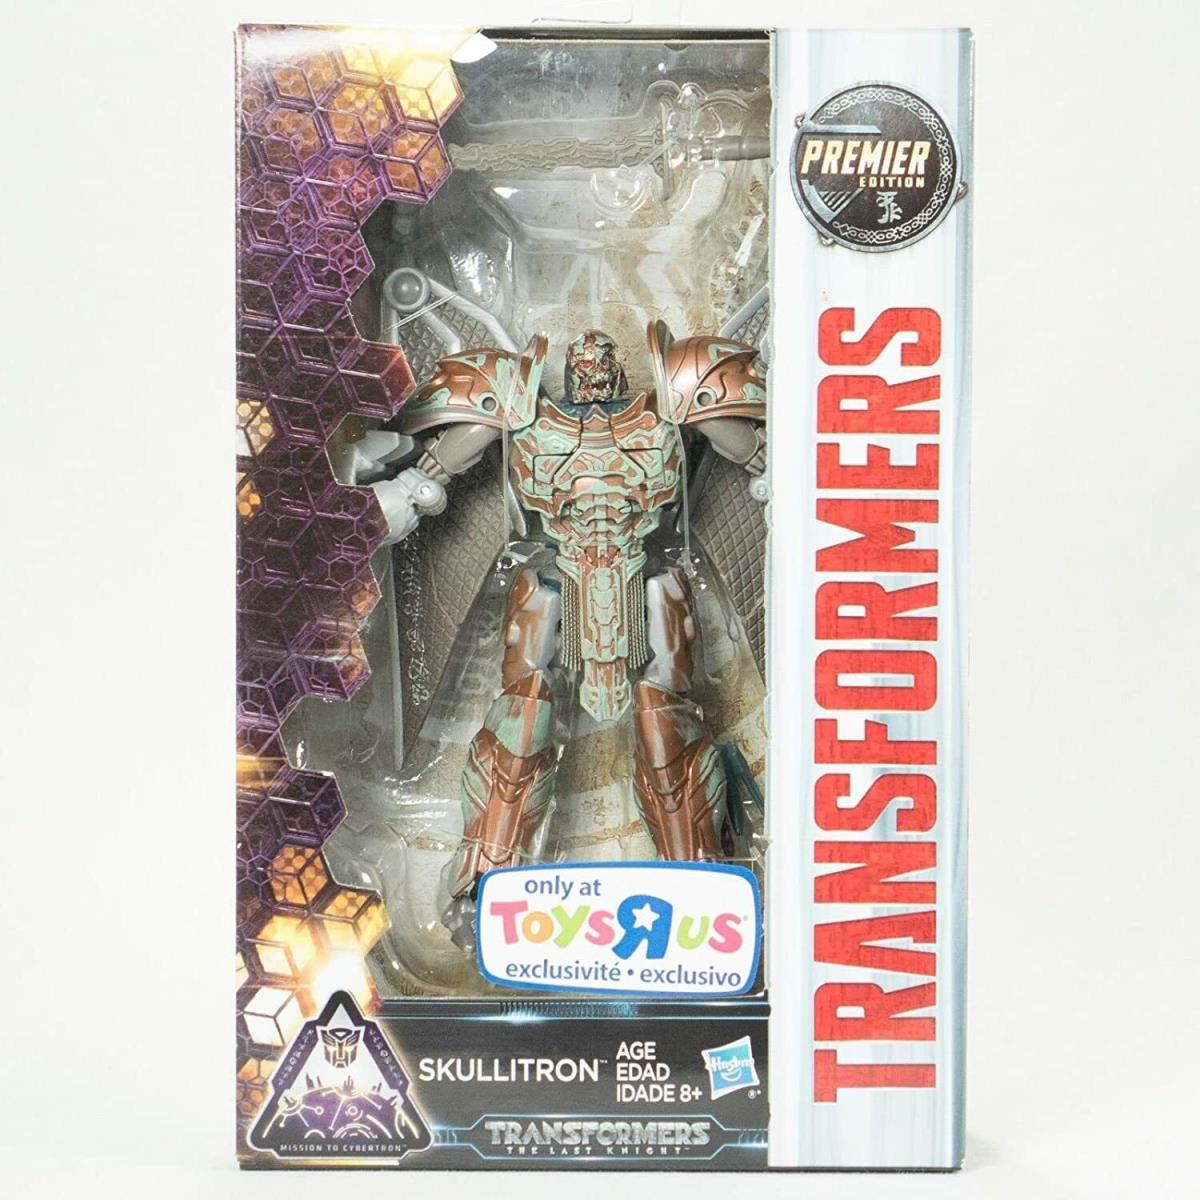 2016 Transformers The Last Knight Skullitron Toys R US Exclusive Premier Edition